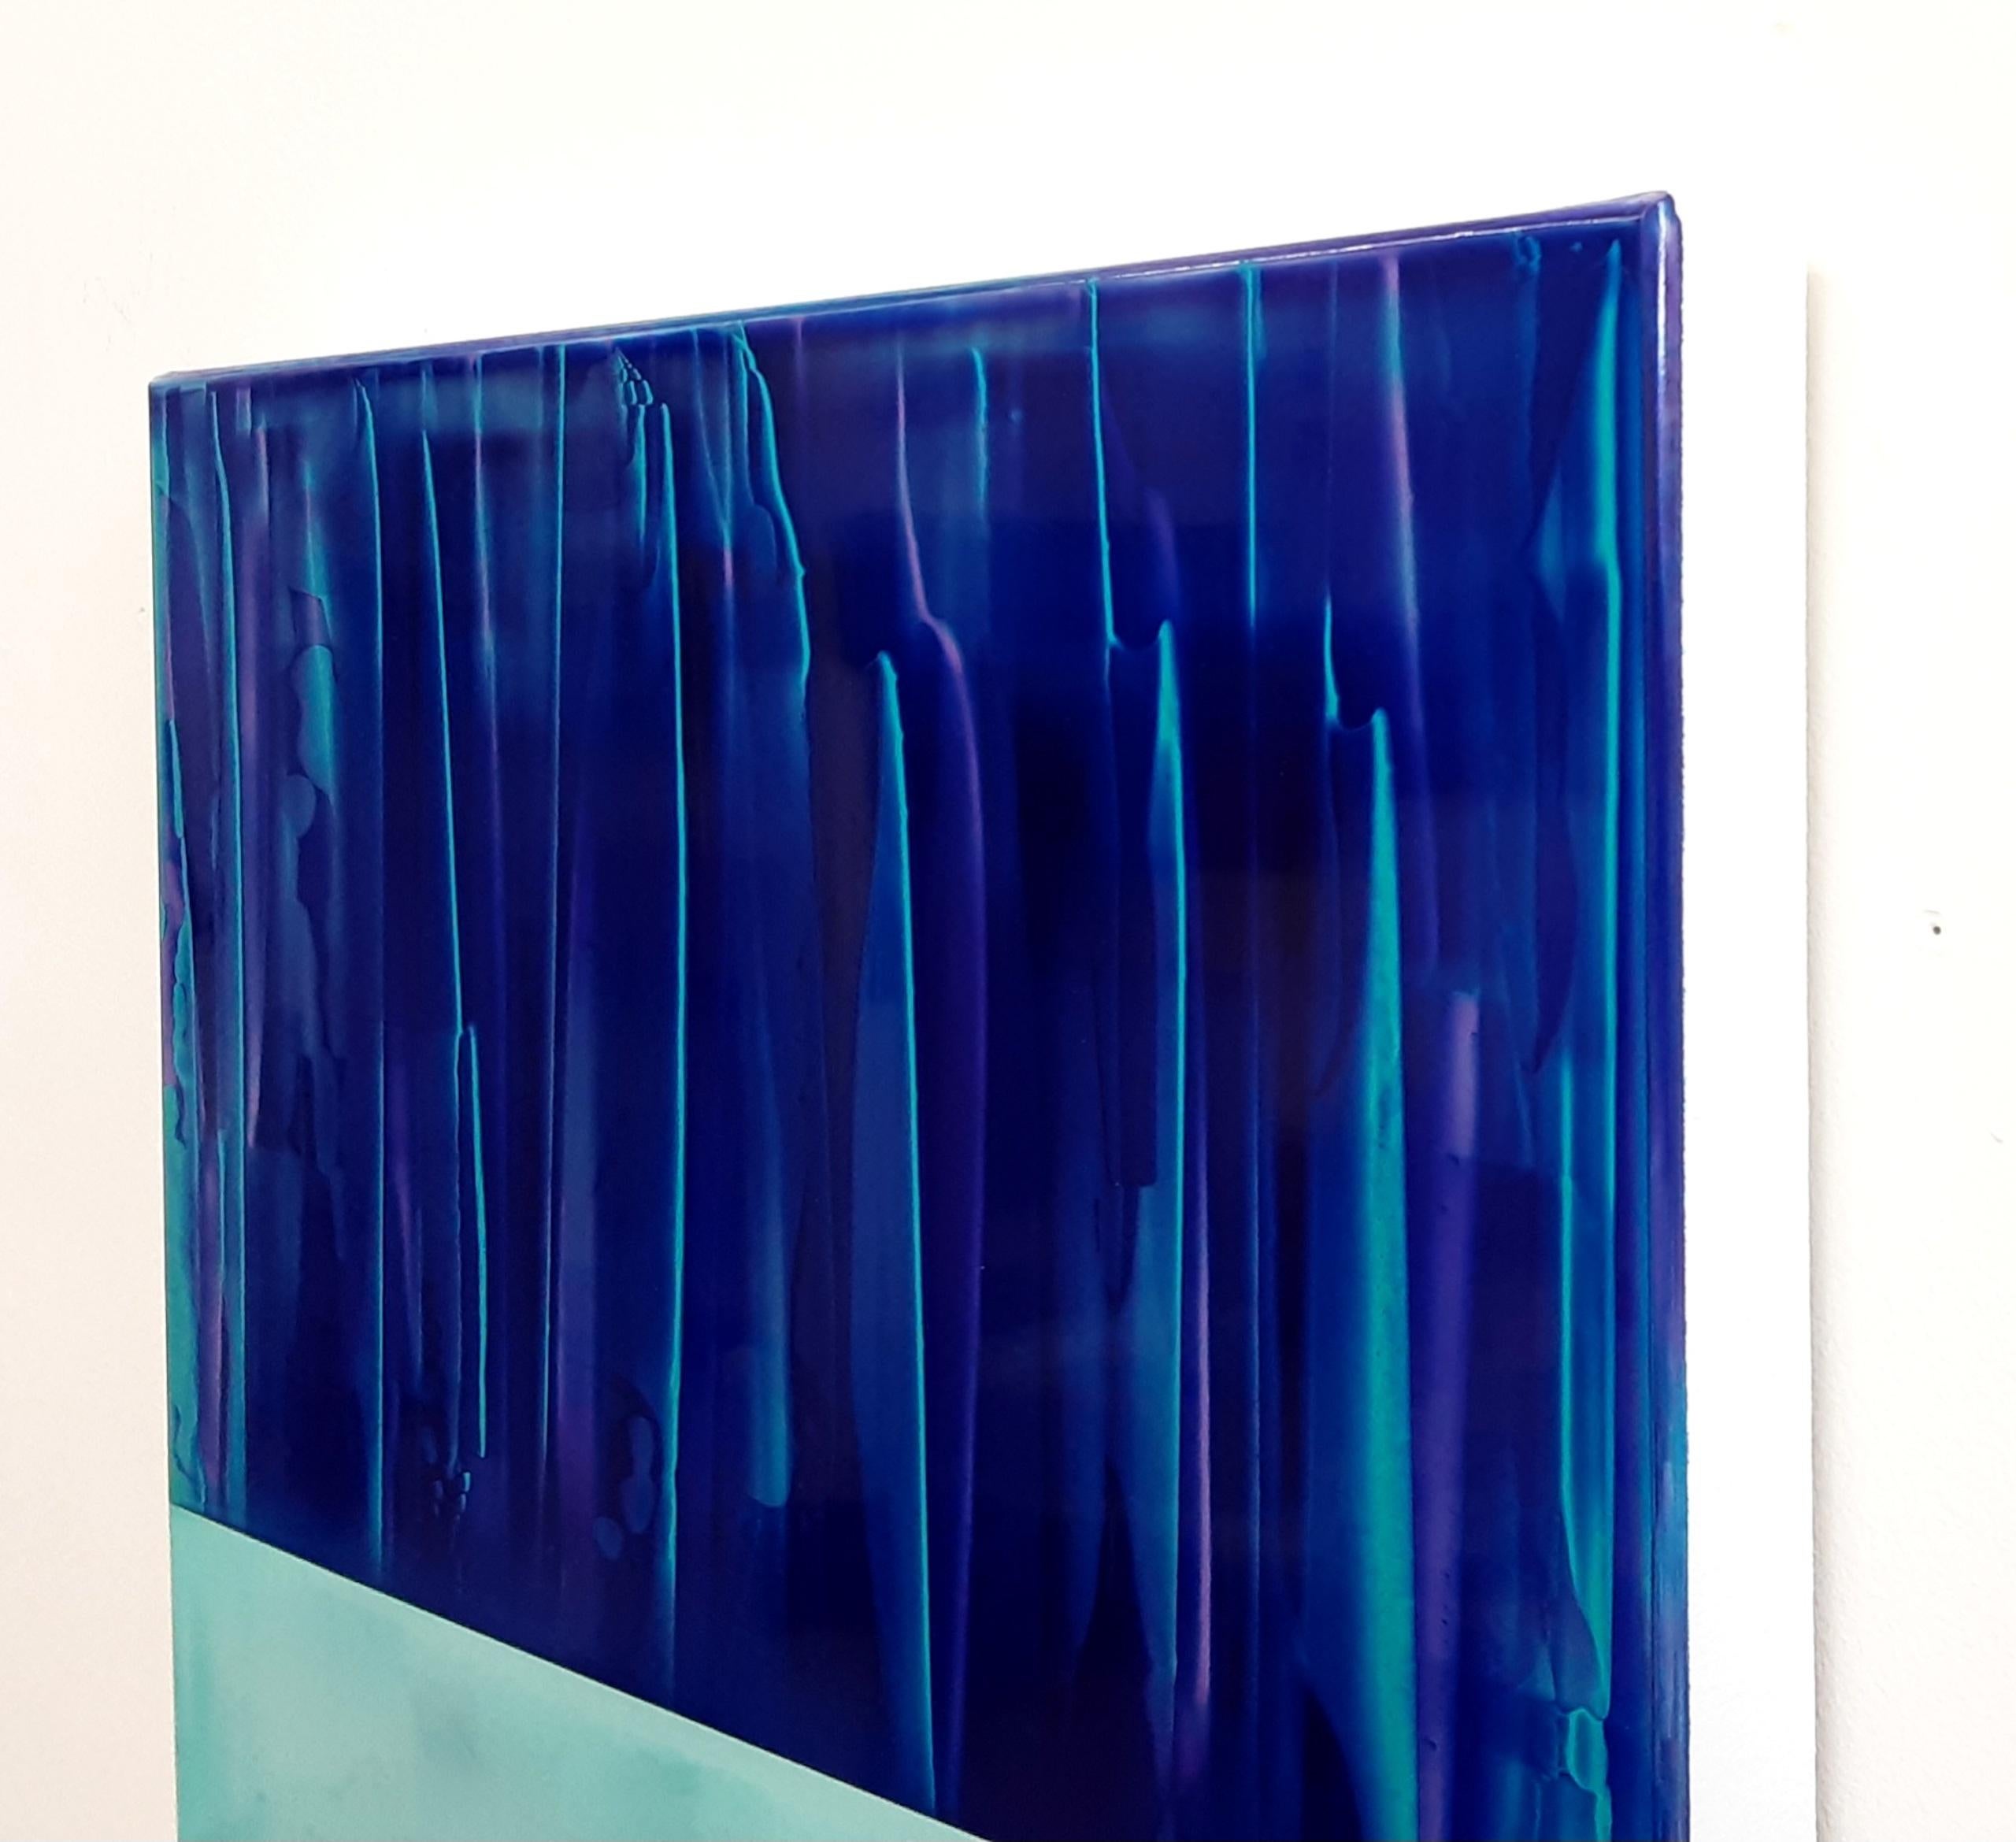 Contrapuntal (3/18) by James Lumsden - Abstract colour painting, blue tones For Sale 5